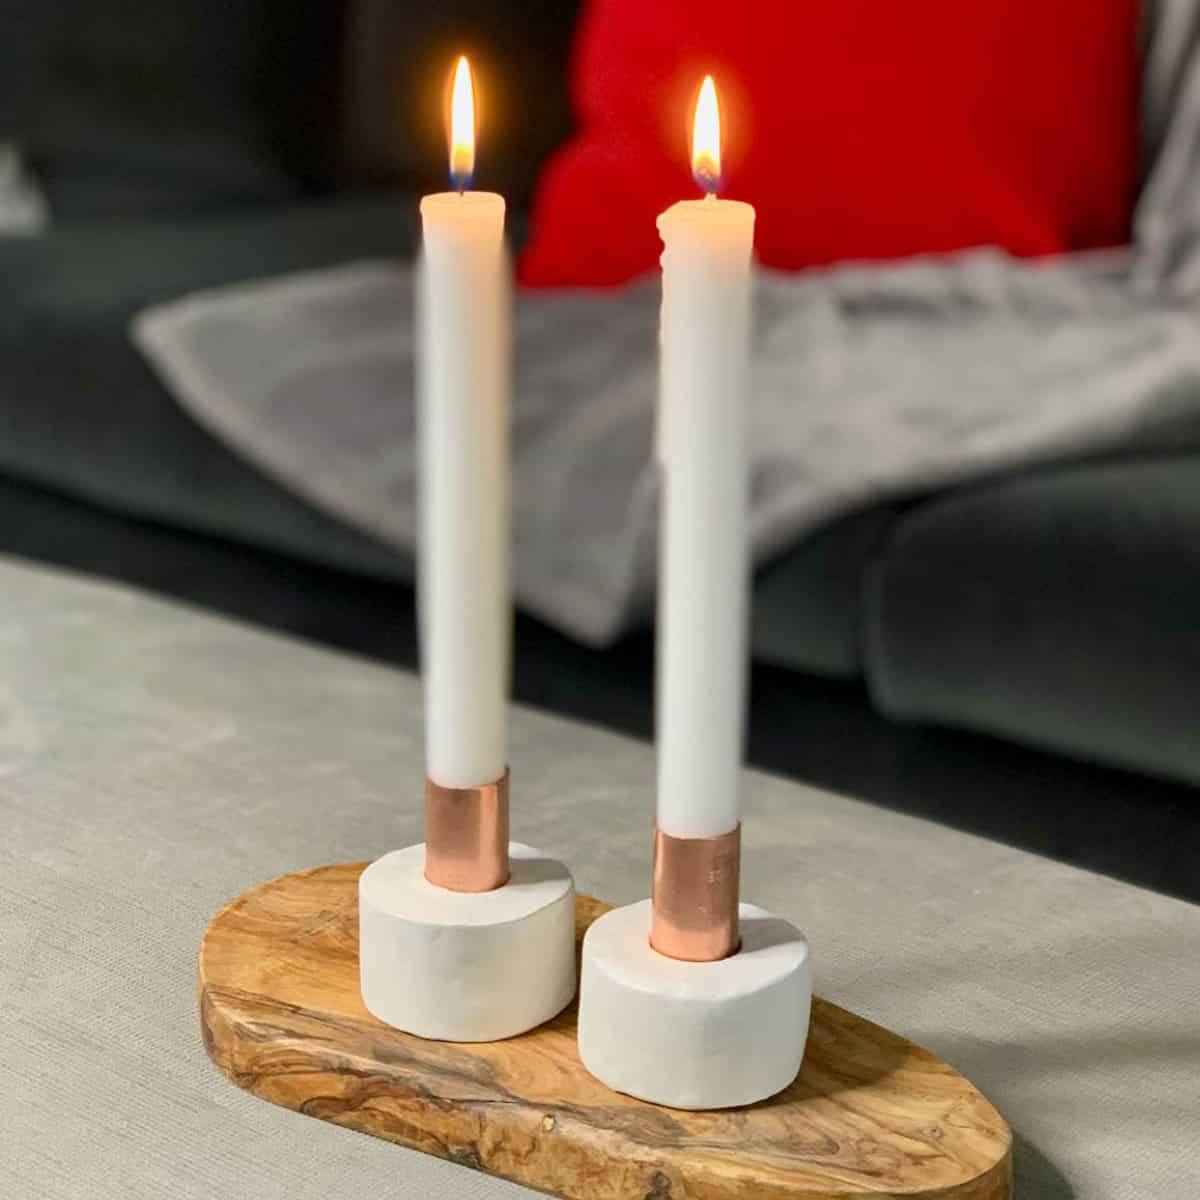 2 candles in candlestick holders.